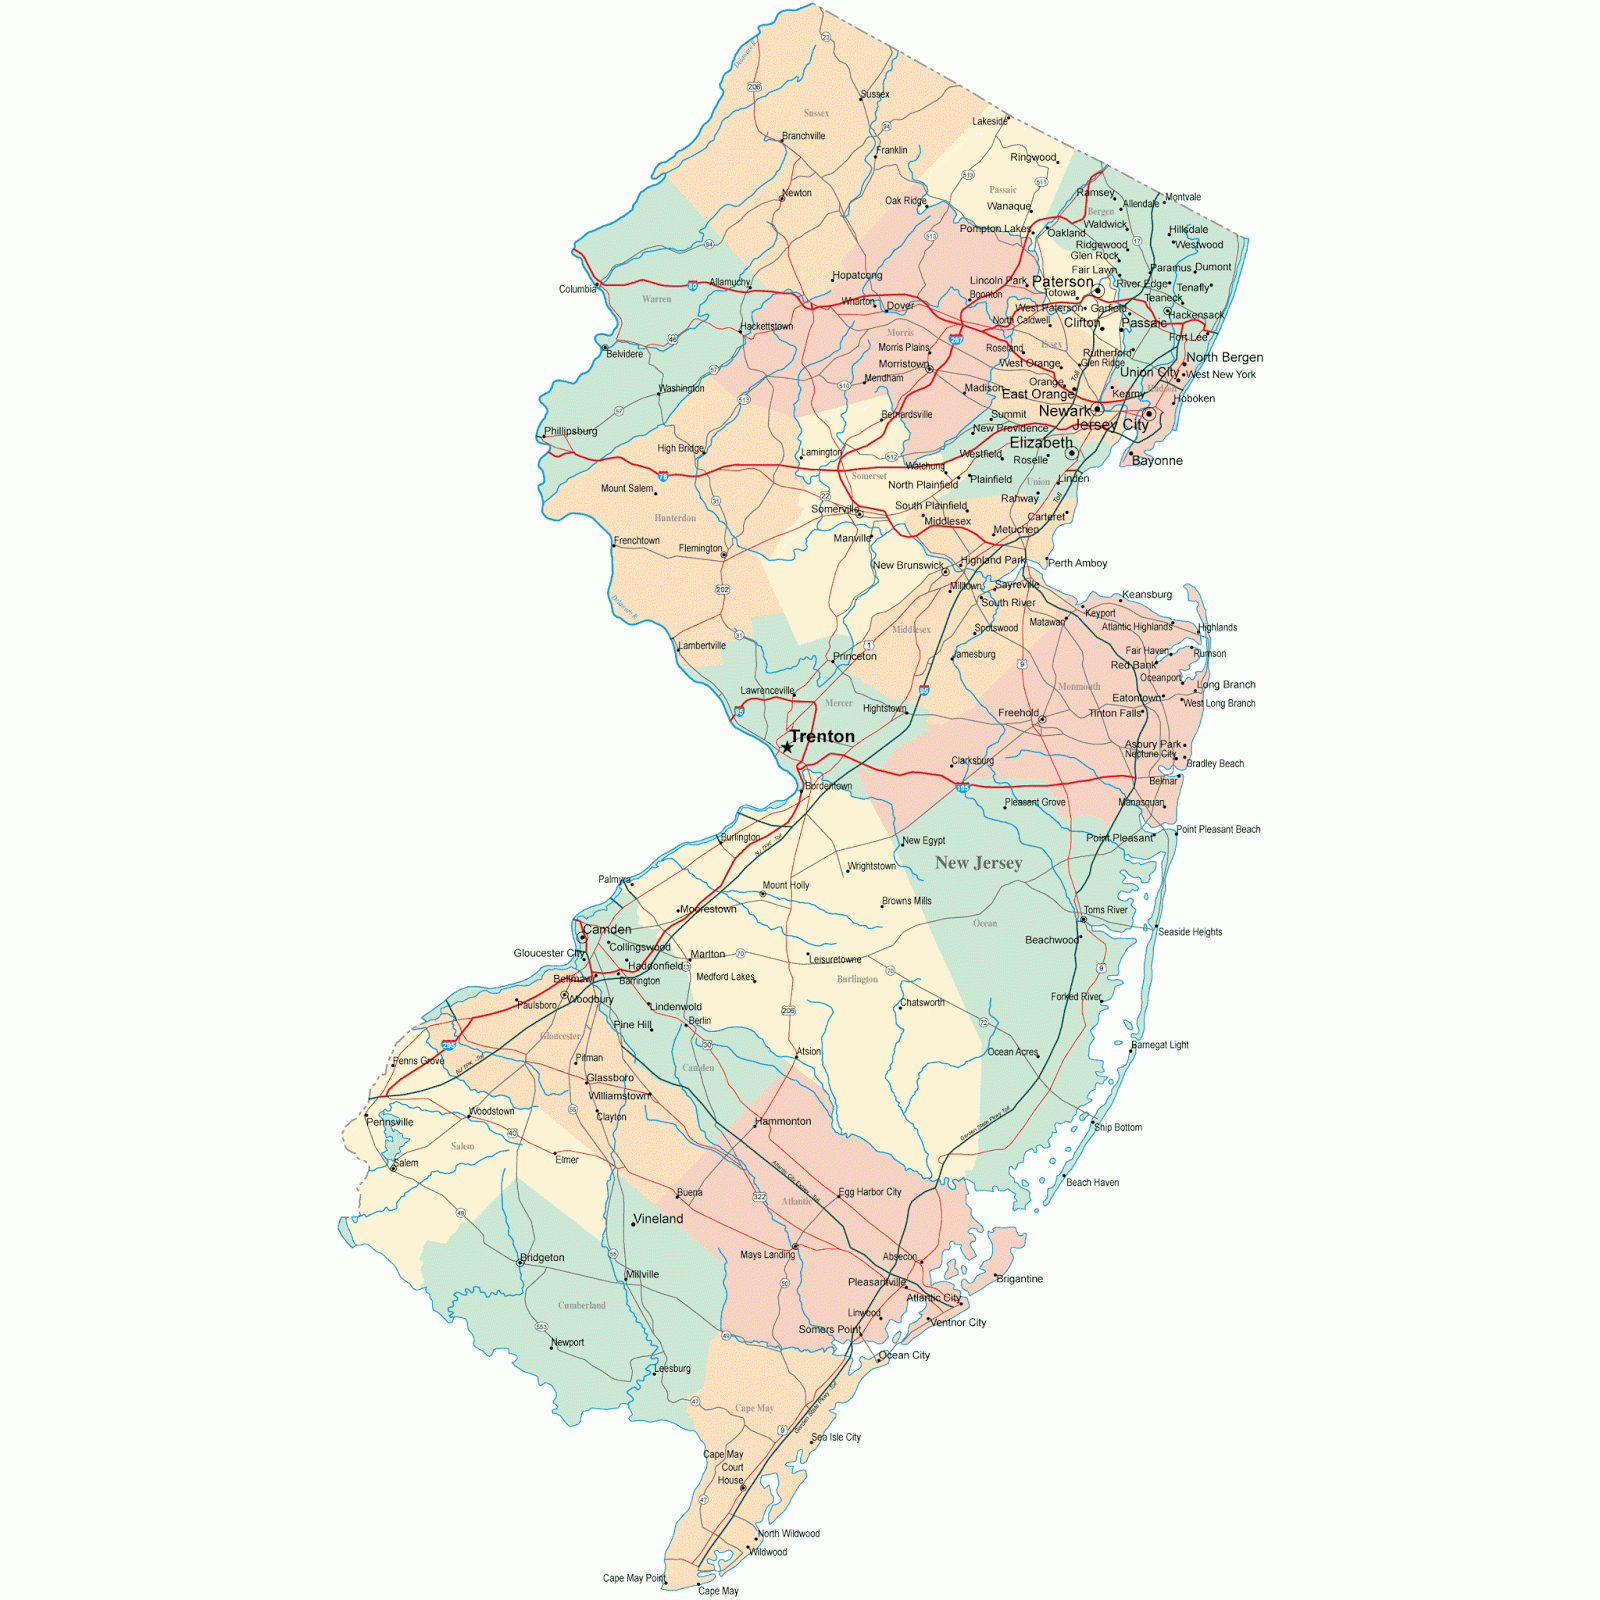 State Map Of New Jersey - Free Printable Maps - Printable Street Map Of Jersey City Nj